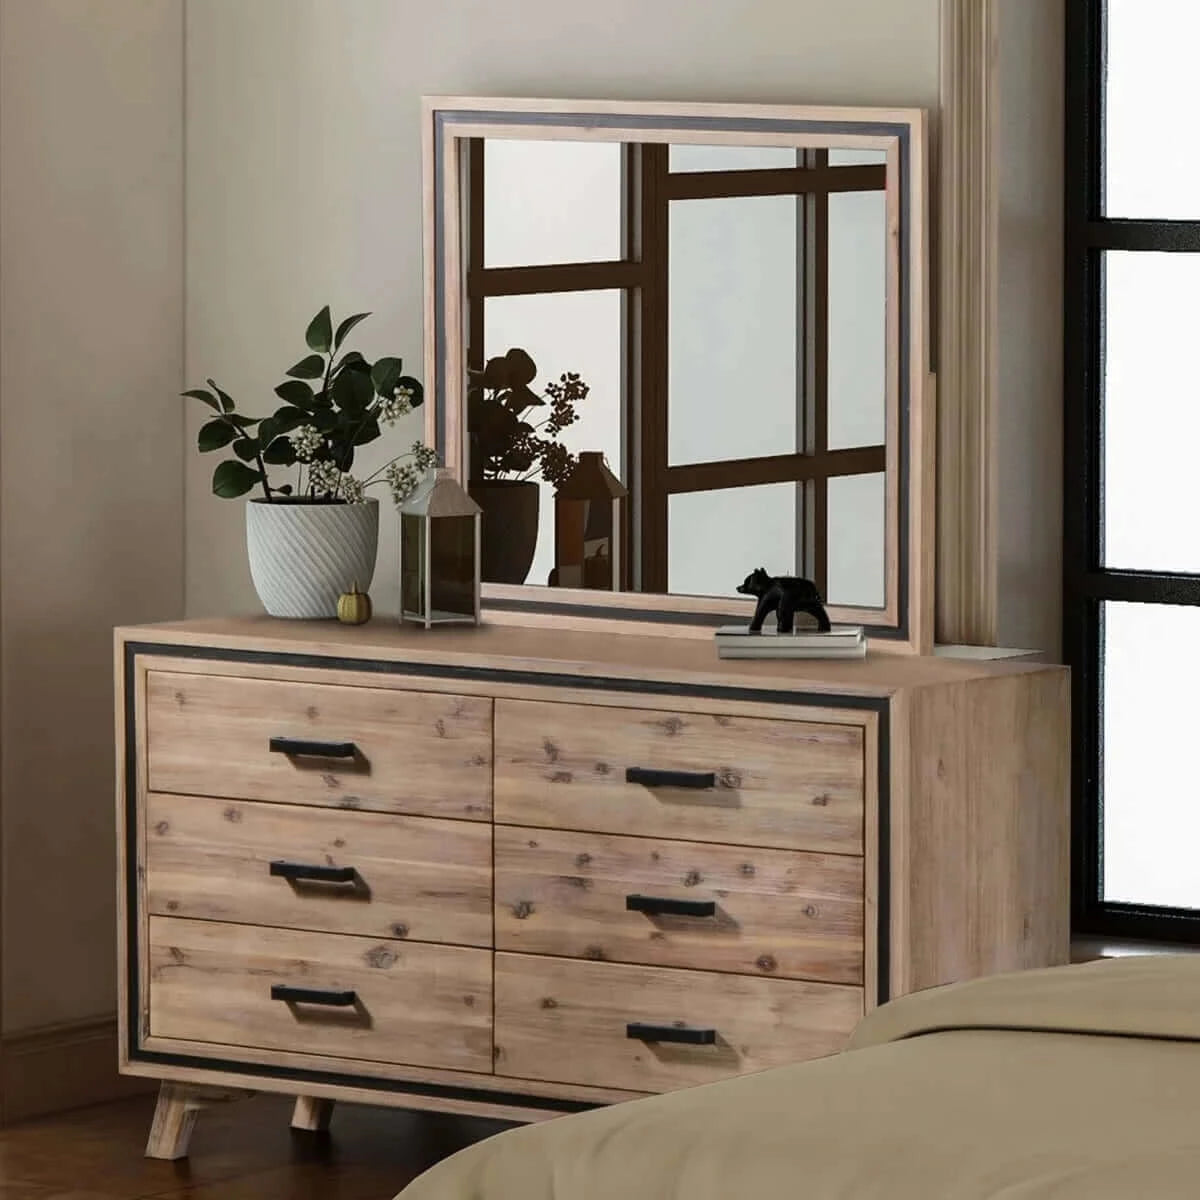 Buy dresser with 6 storage drawers in solid acacia with mirror in silver brush colour - upinteriors-Upinteriors